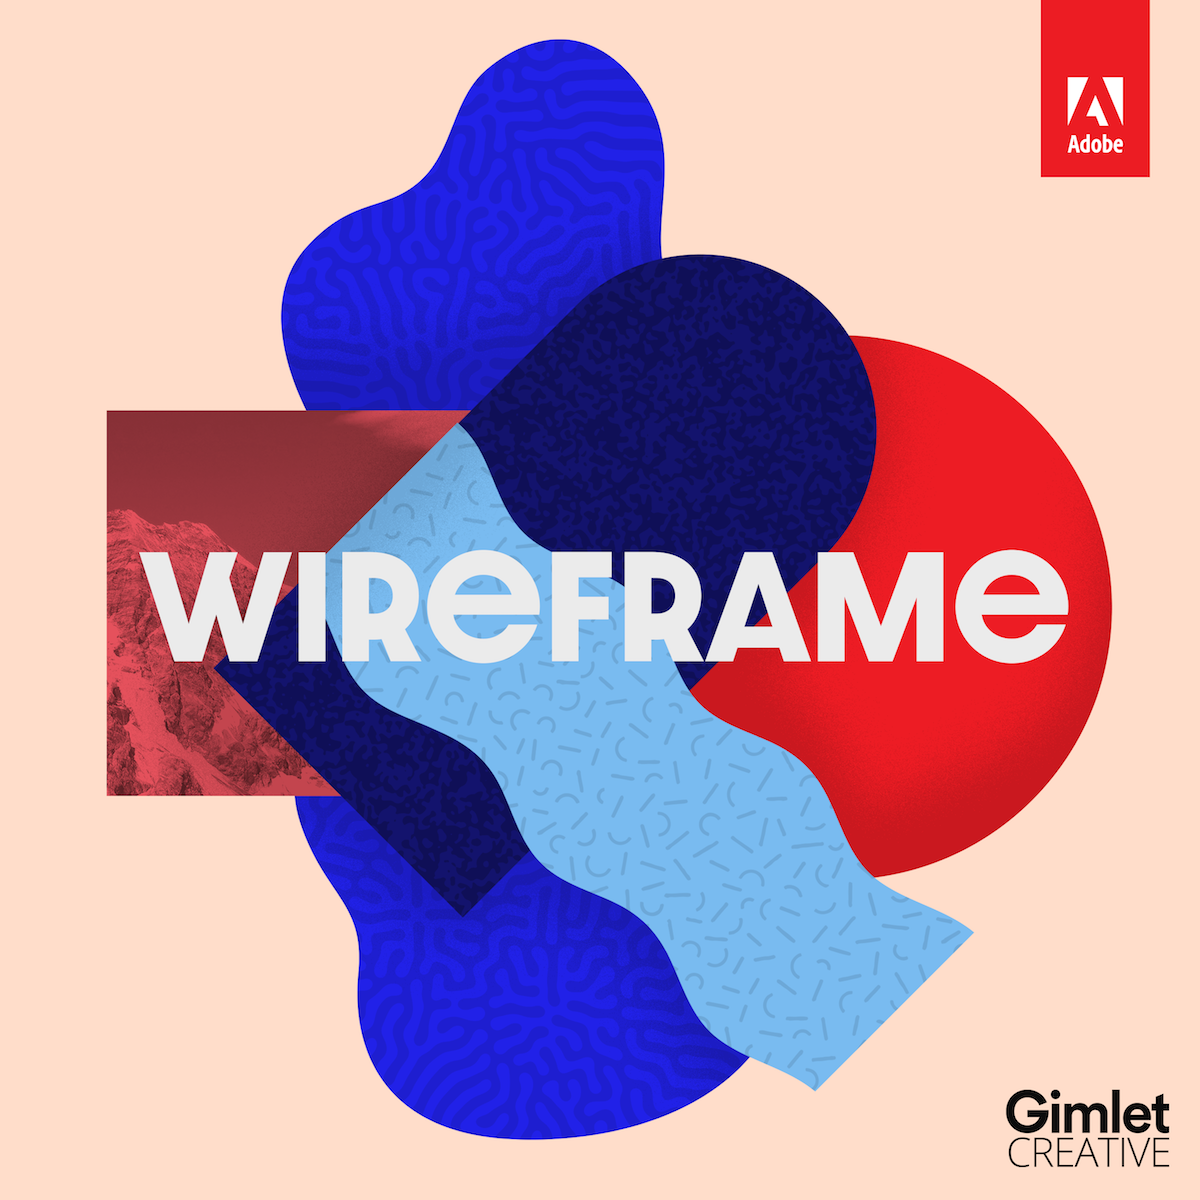 Wireframes idea #26: Wireframe: A High-quality Storytelling Podcast about Design